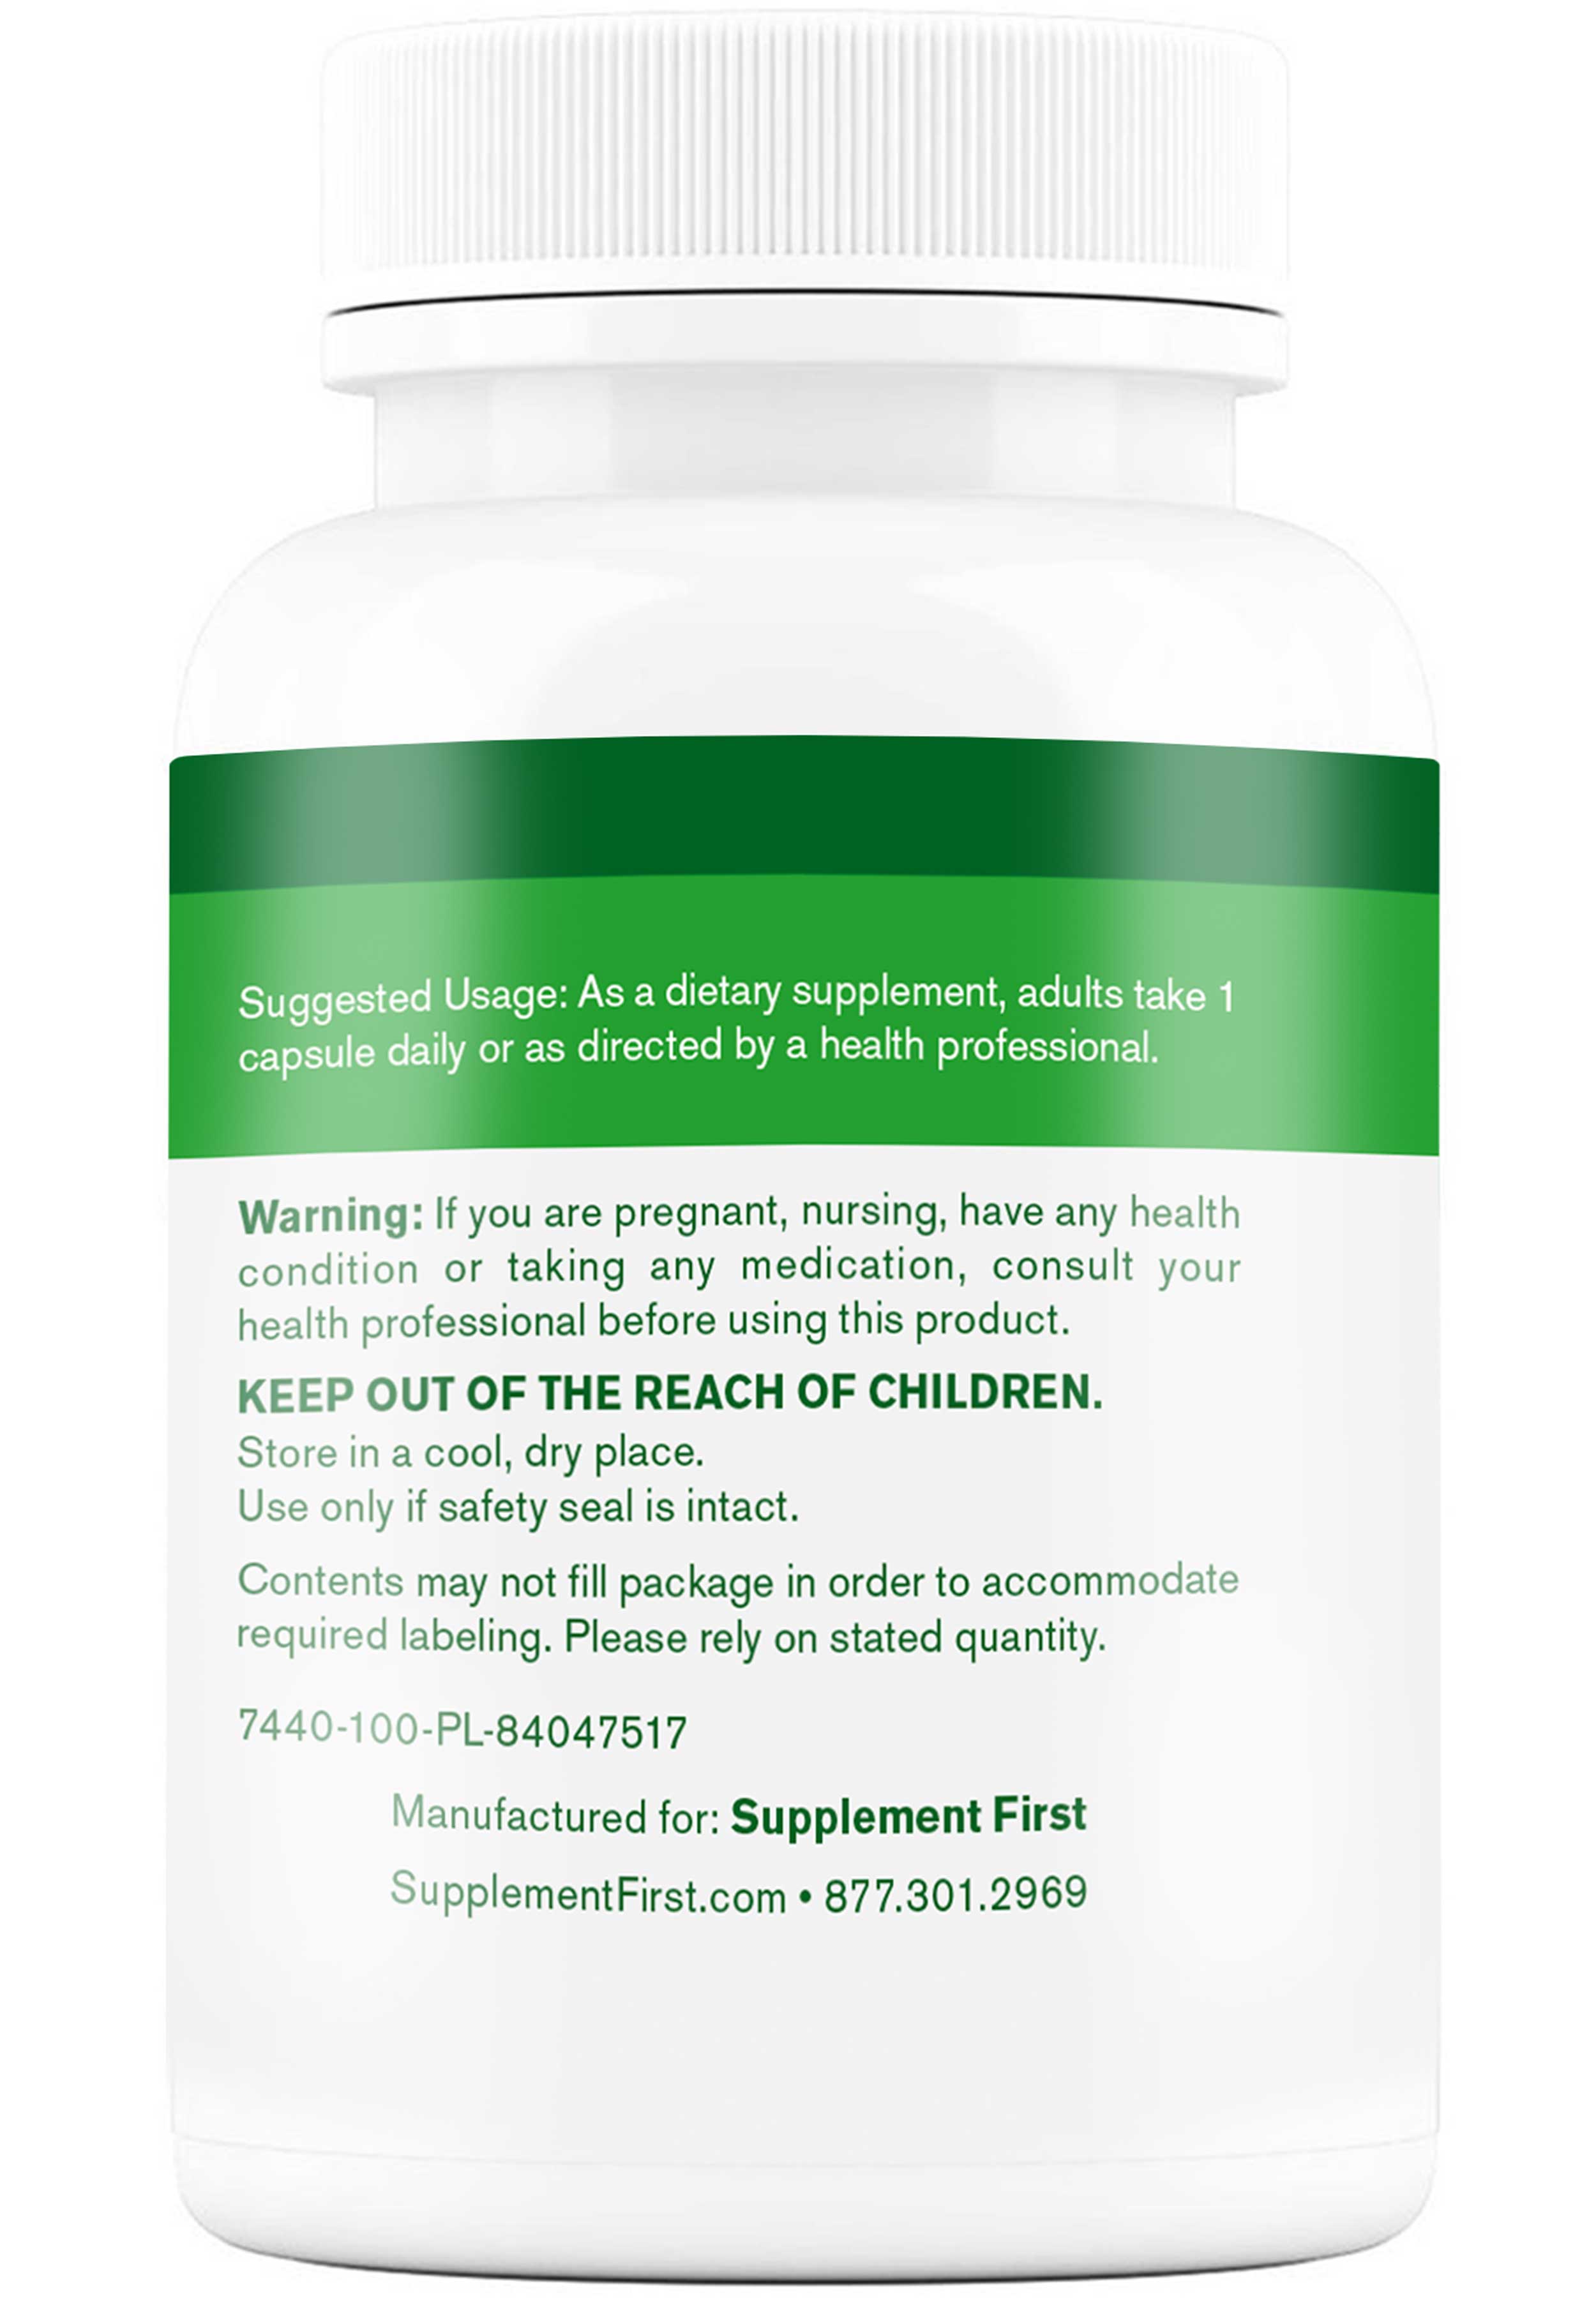 Supplement First Zinc Picolinate 50 mg Label